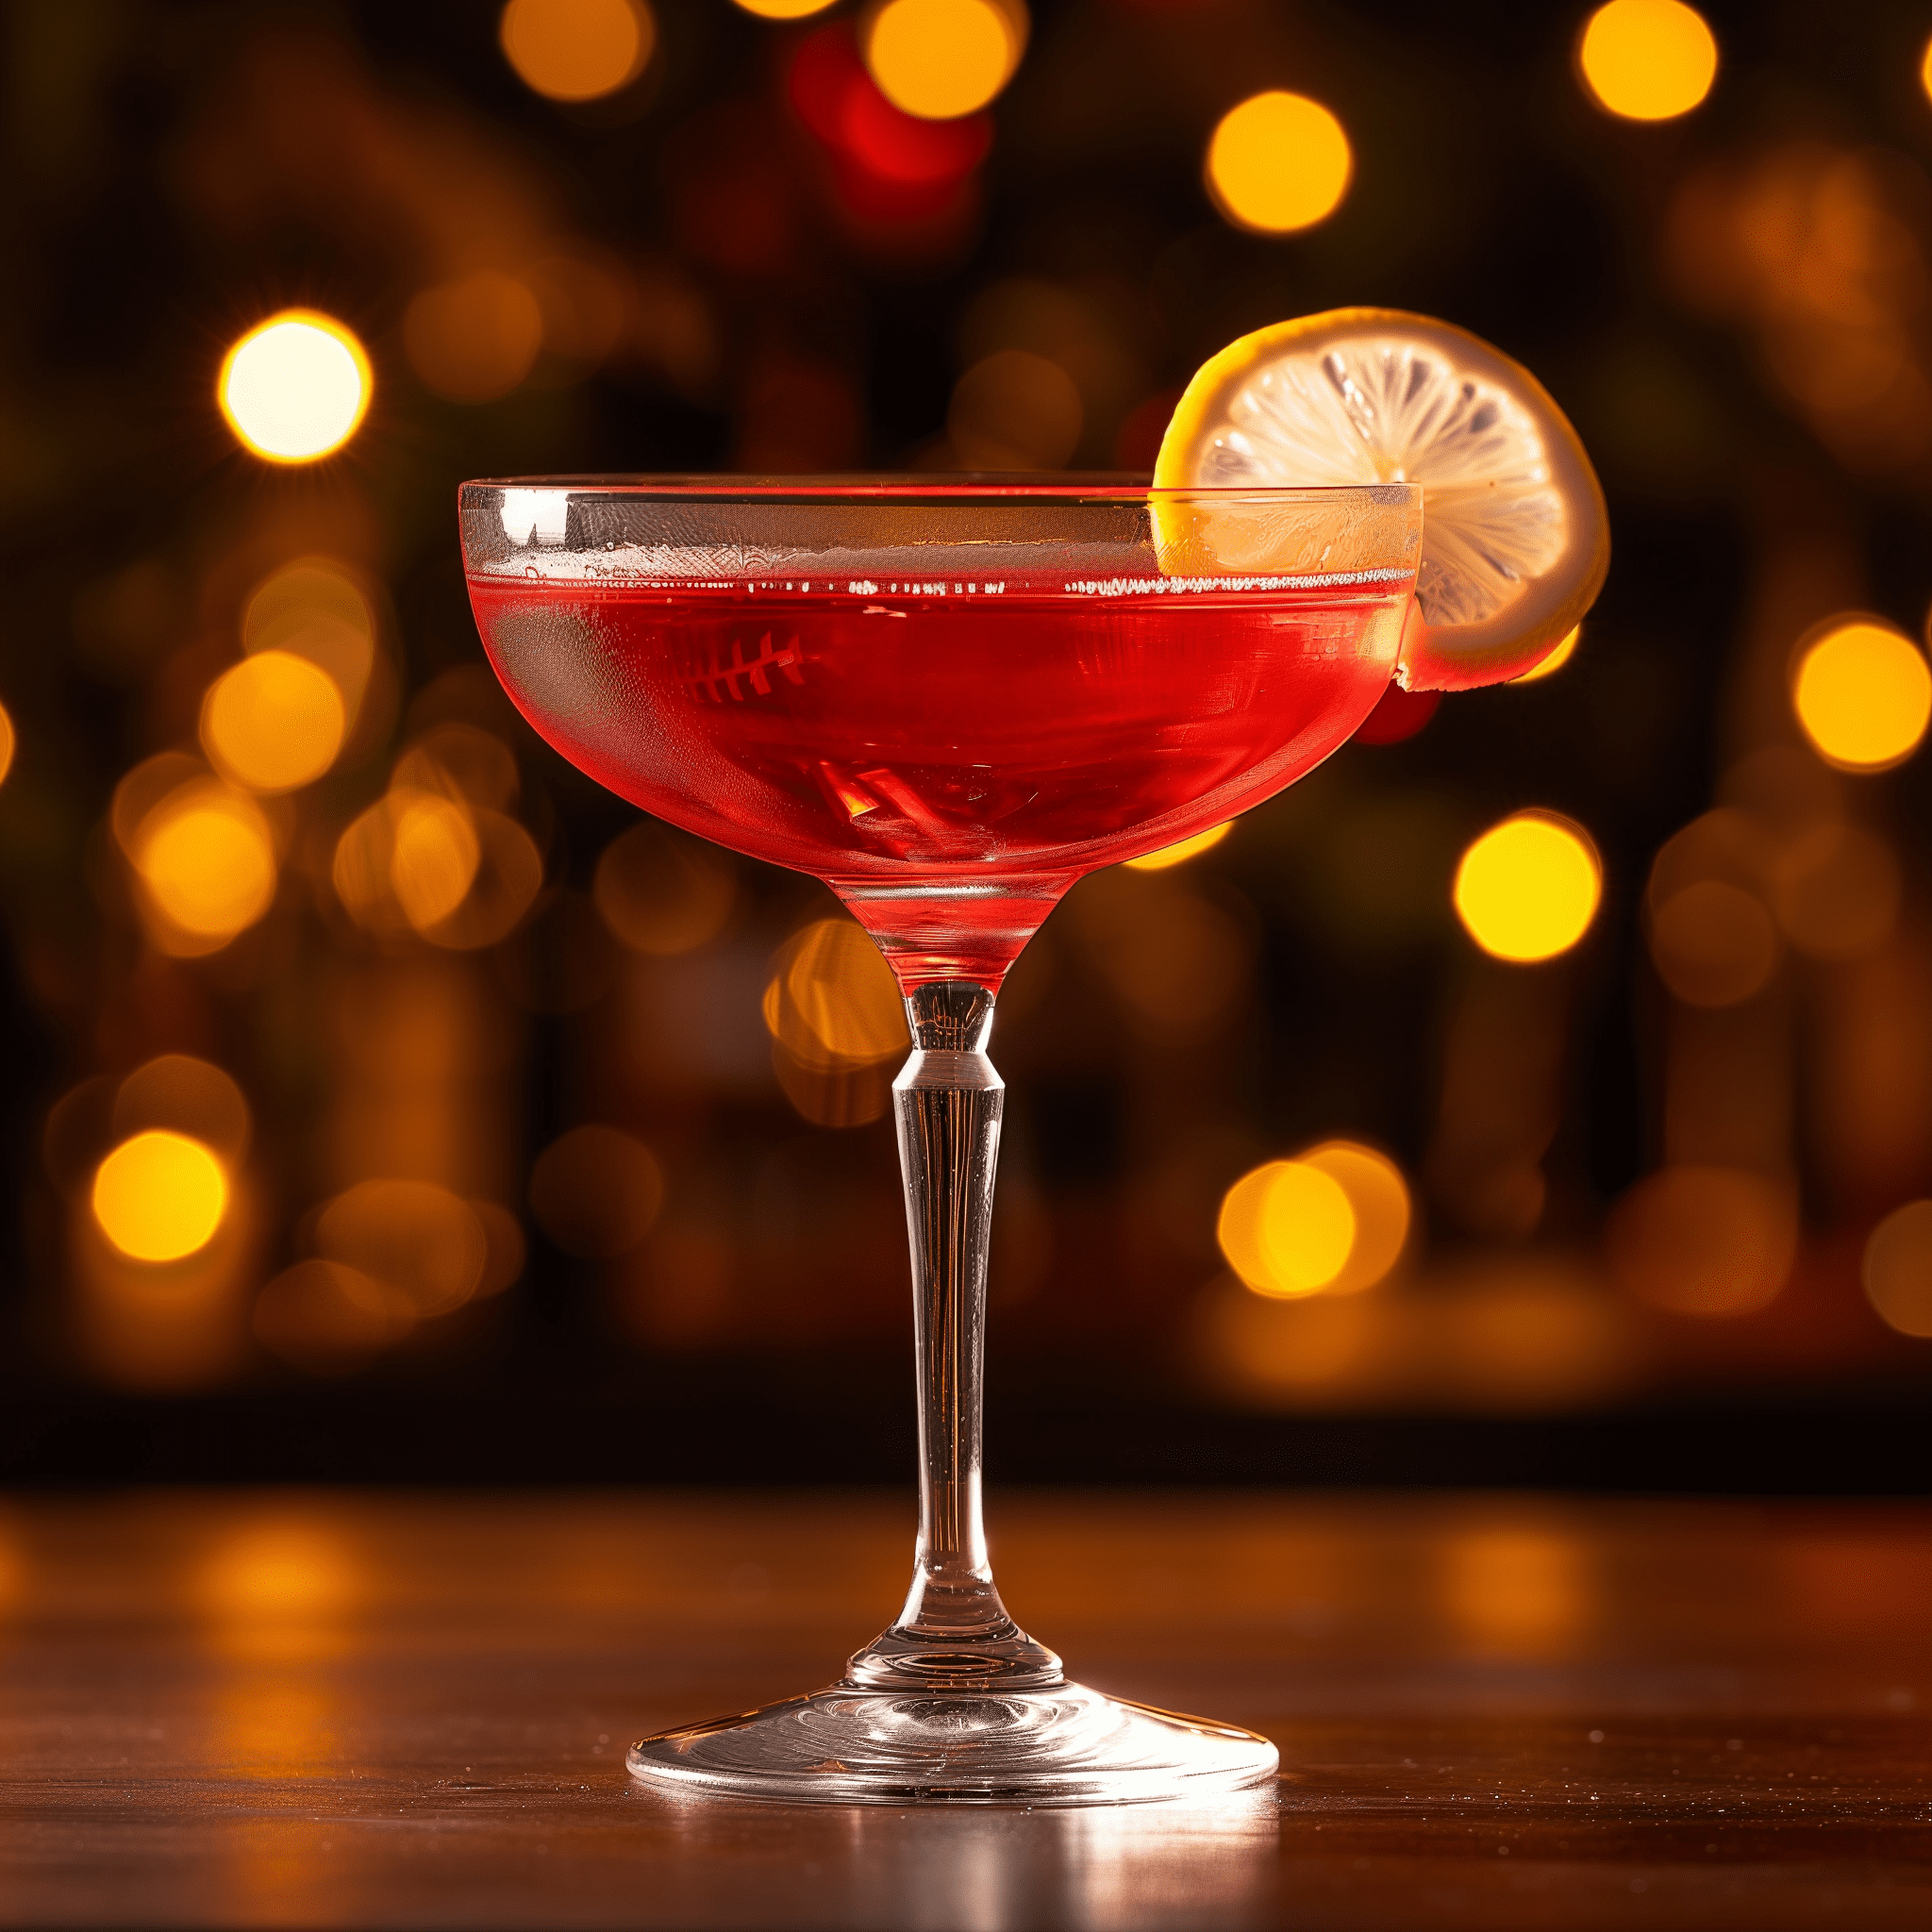 Red Raider Cocktail Recipe - The Red Raider offers a harmonious blend of sweet and sour with a robust bourbon backbone. The triple sec provides a subtle orange sweetness, while the lemon juice adds a zesty tang. The grenadine offers a hint of pomegranate-like sweetness and gives the drink its signature red hue.